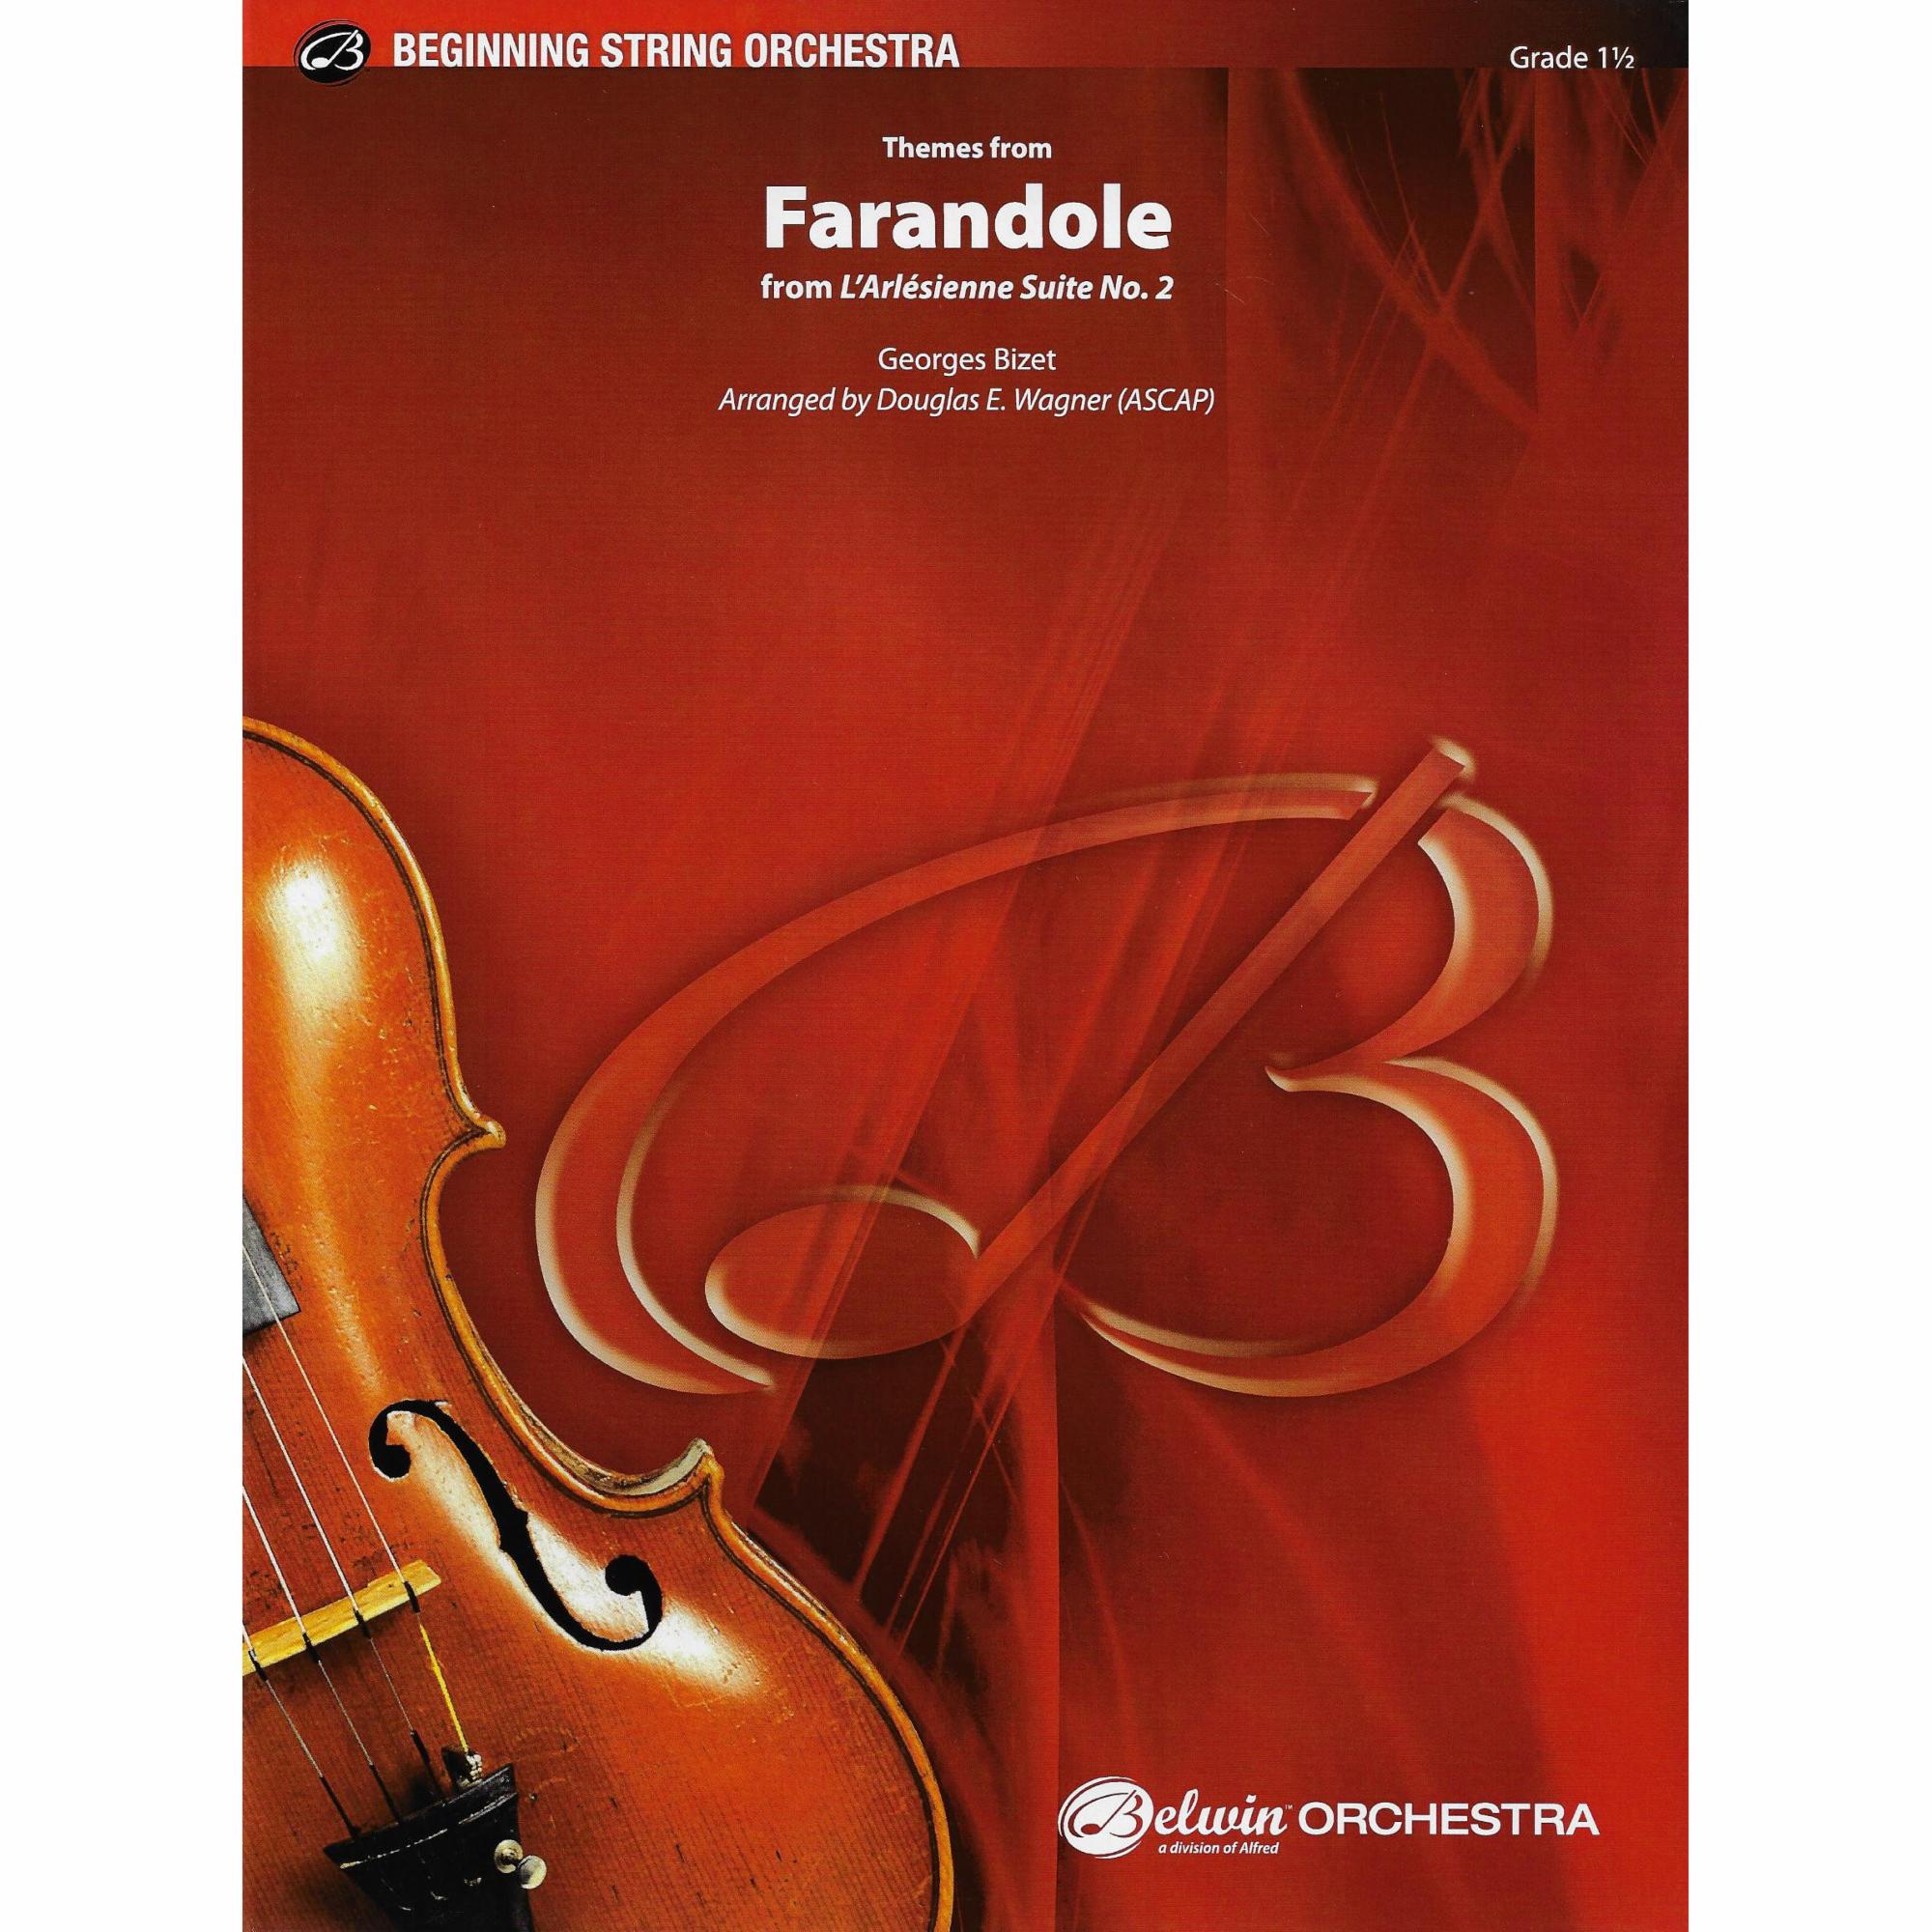 Themes from Farandole from L'Arlesienne Suite No. 2 for String Orchestra